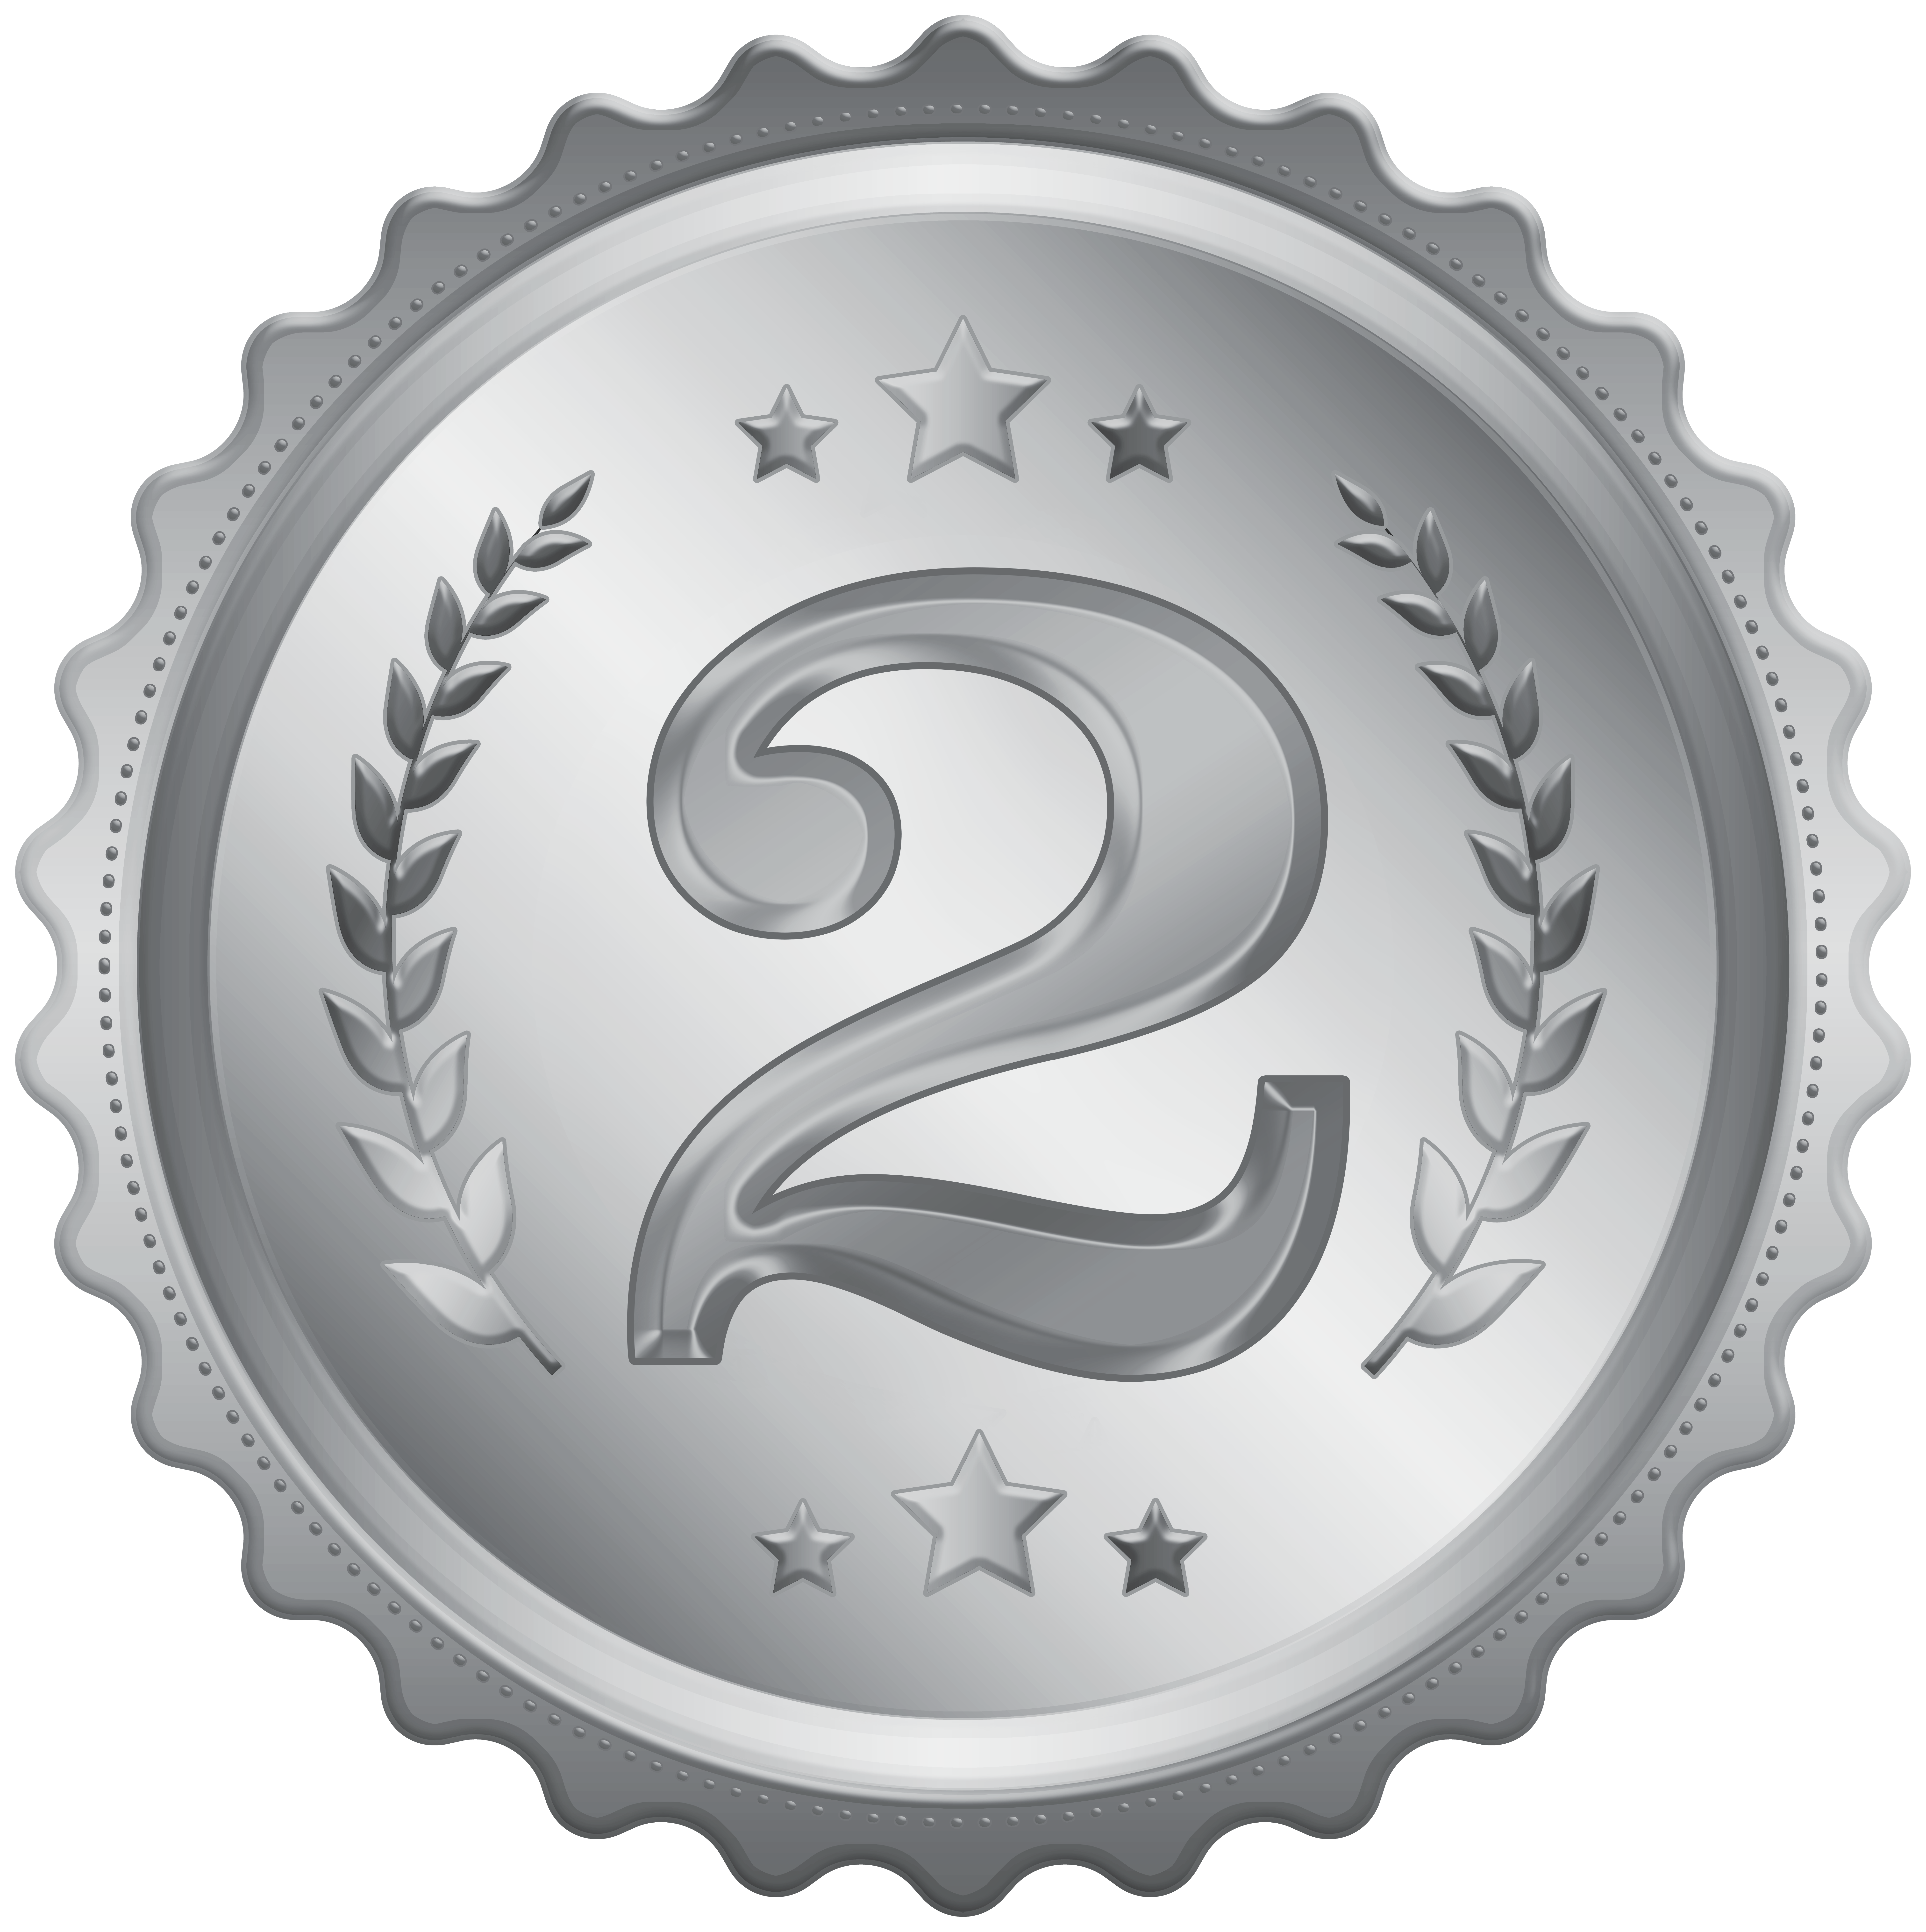 Second Place Medal Badge Clipart Image.